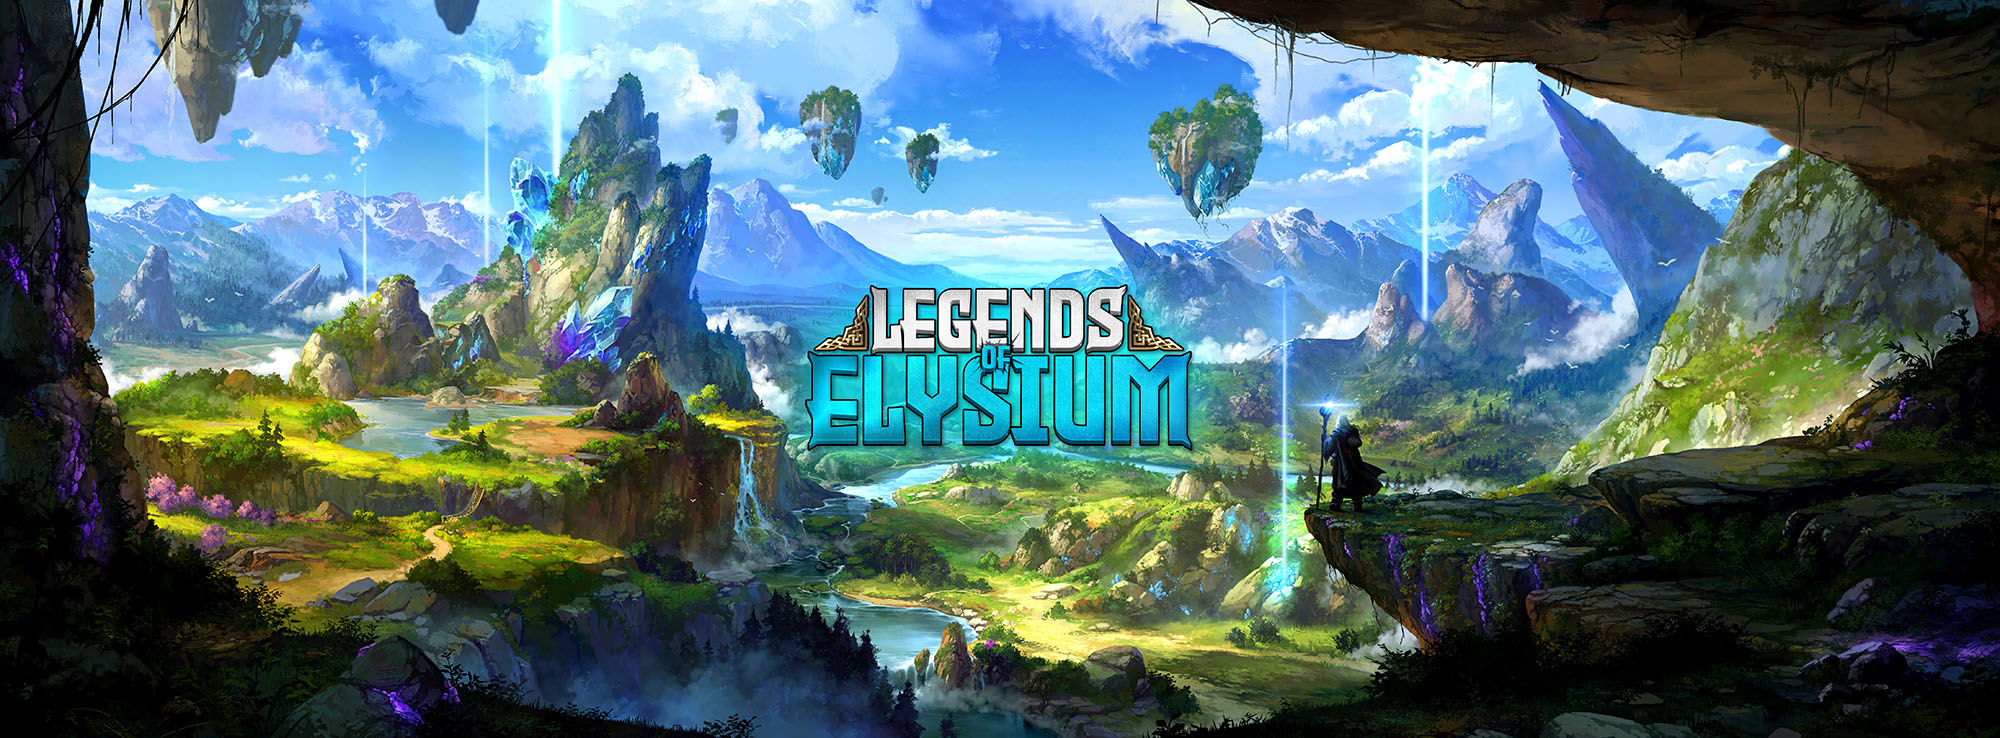 Among the many exciting games available on Instant Gaming is Legends of Elysium, a captivating free-to-play game that transports players to a realm brimming with magic, mythical creatures, and endless possibilities. Embark on a thrilling quest to restore balance to the world, defeat formidable foes, and forge your destiny in this immersive TCG experience.